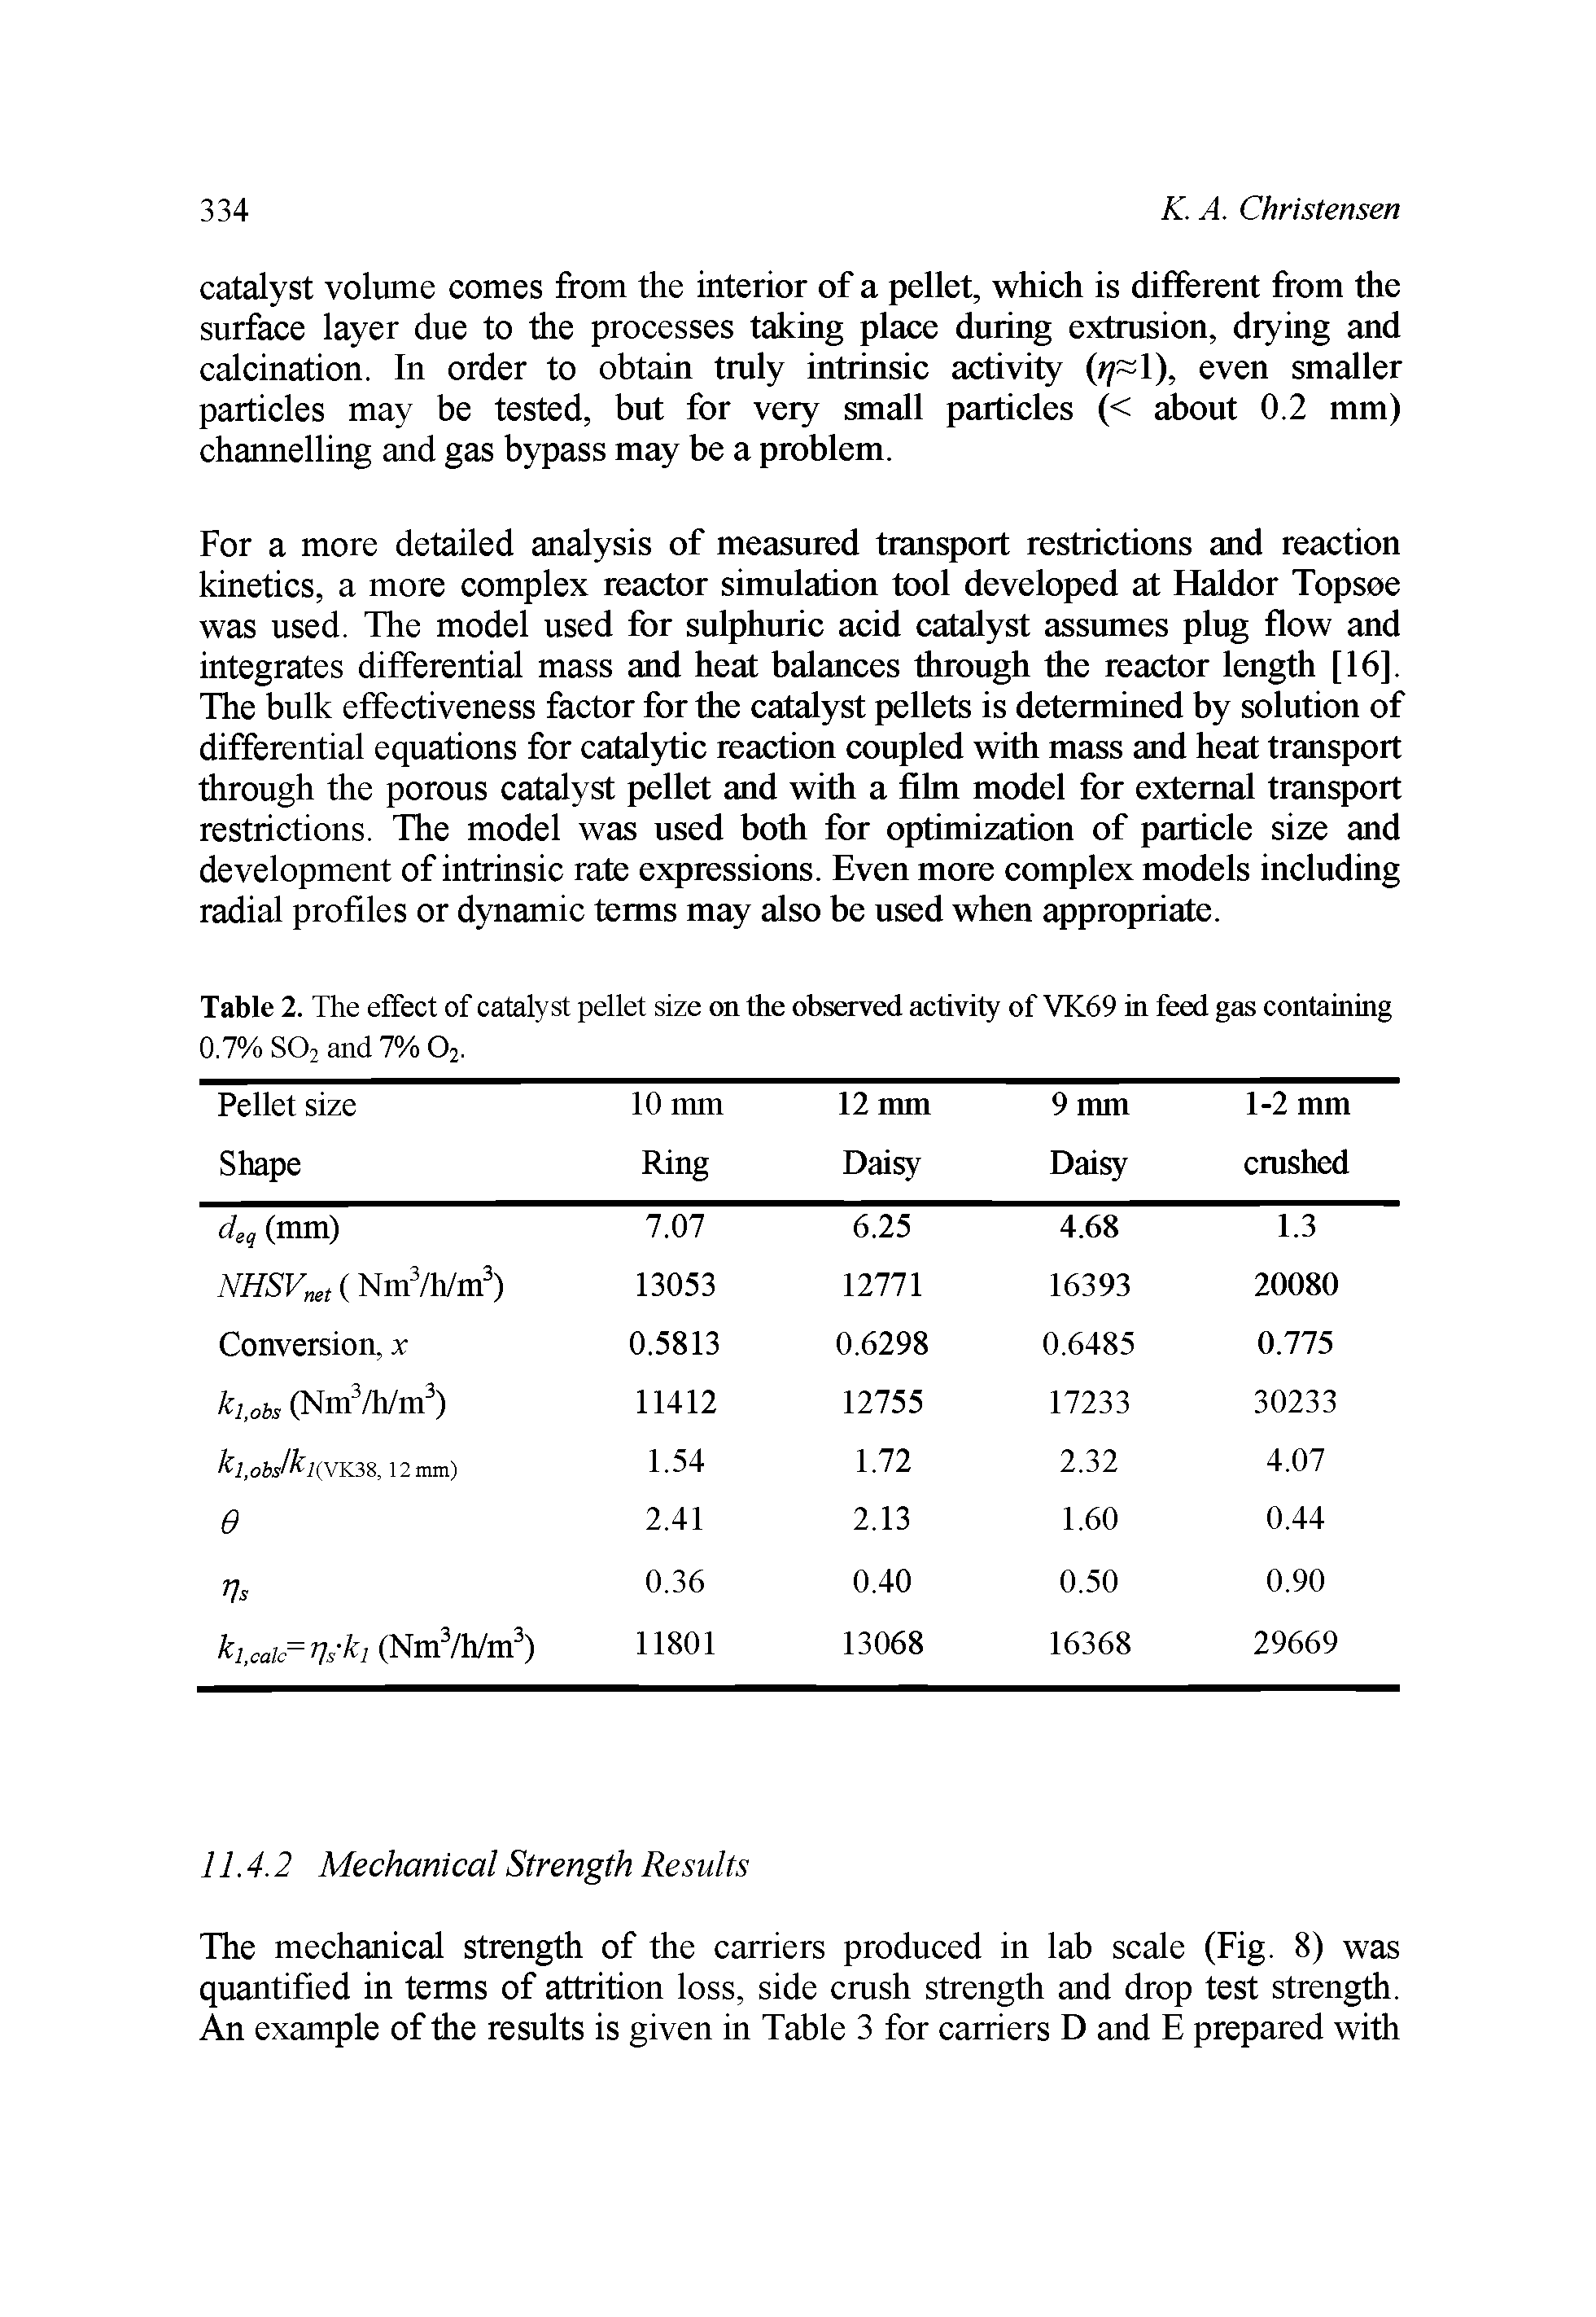 Table 2. The effect of catalyst pellet size on the observed activity of VK69 in feed gas containing 0.7% S02 and 7% 02.